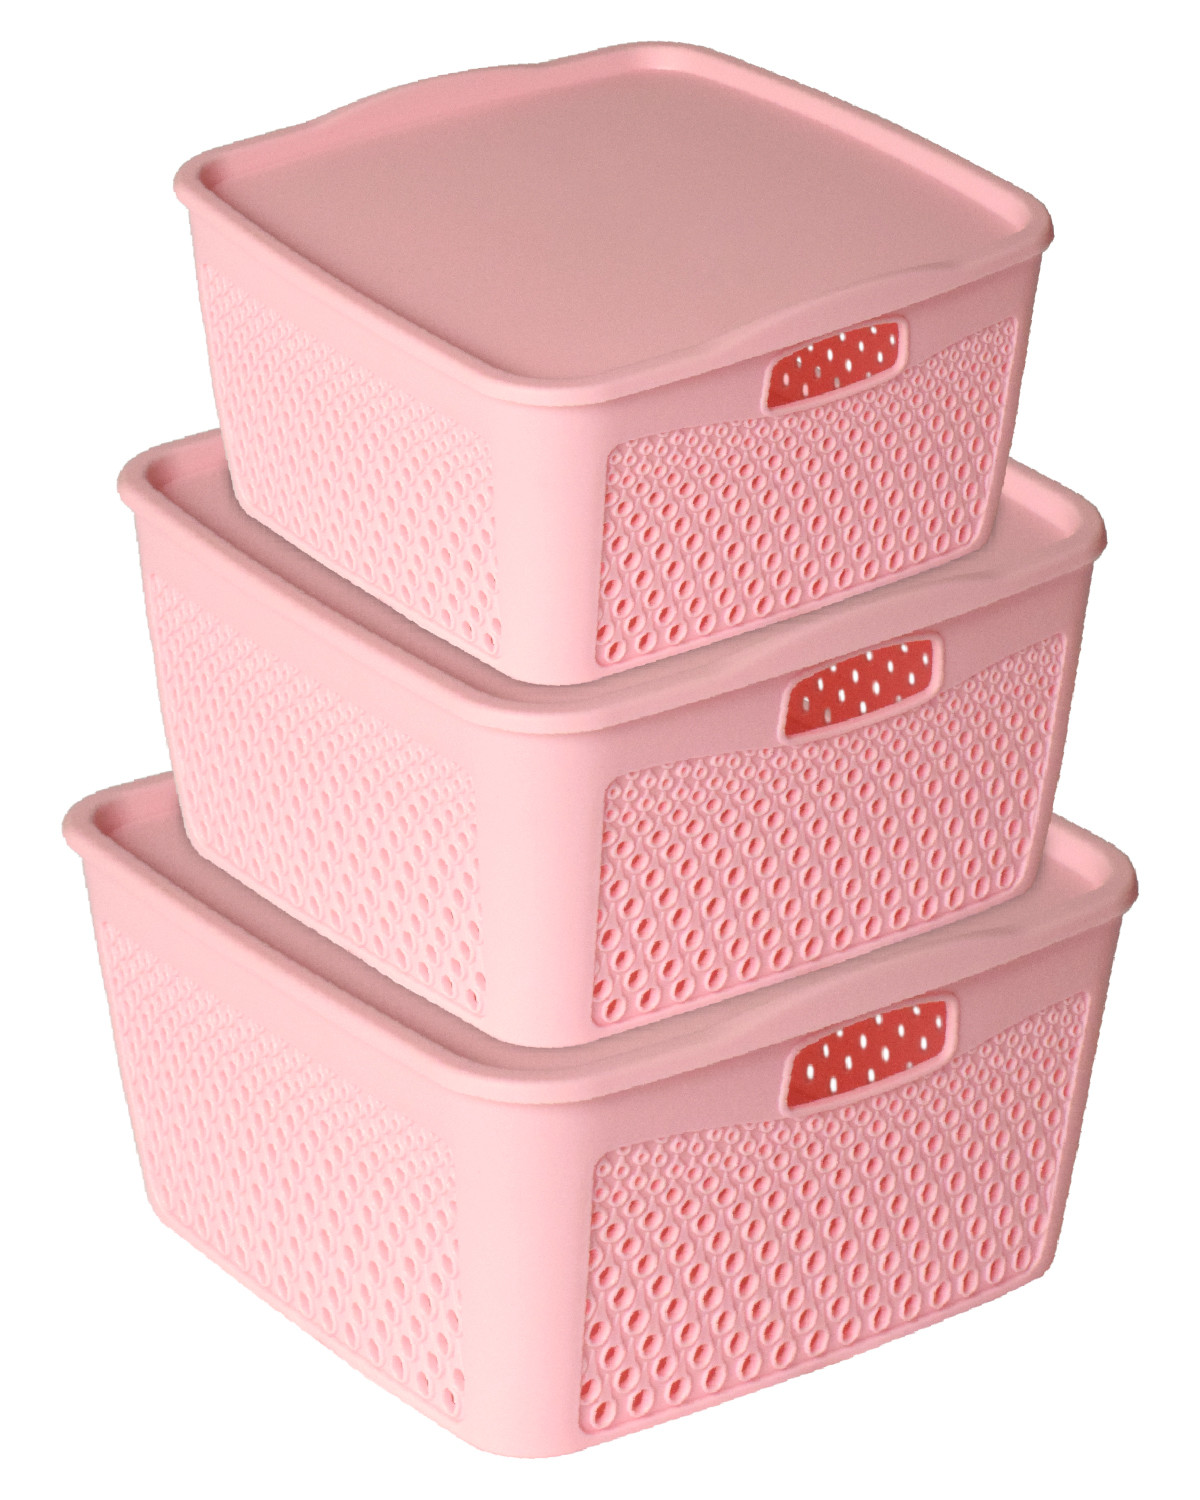 Kuber Industries Netted Design Unbreakable Multipurpose Square Shape Plastic Storage Baskets with lid Small, Medium, Large Pack of 3 (Pink)